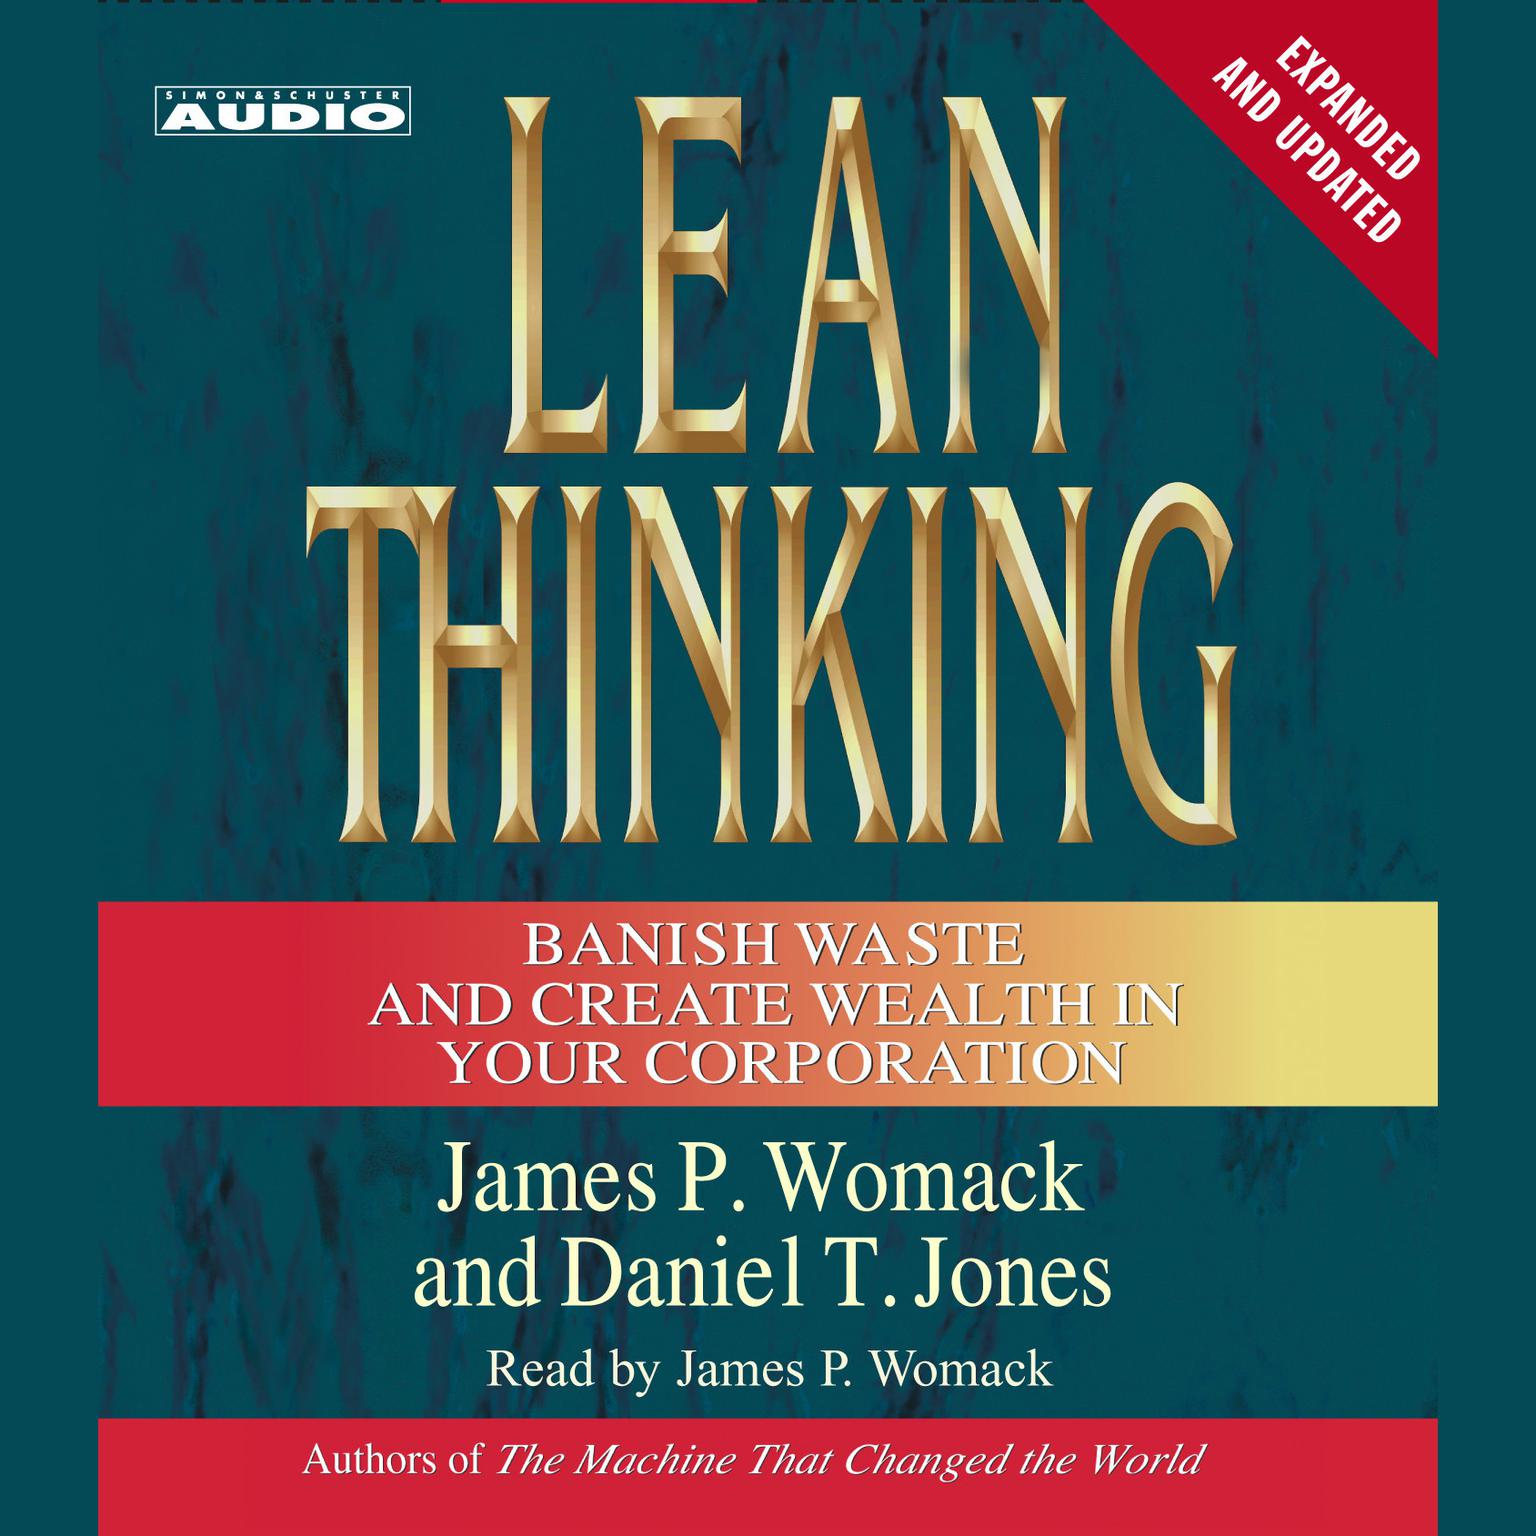 Lean Thinking (Abridged): Banish Waste and Create Wealth in Your Corporation, 2nd Ed Audiobook, by James P. Womack